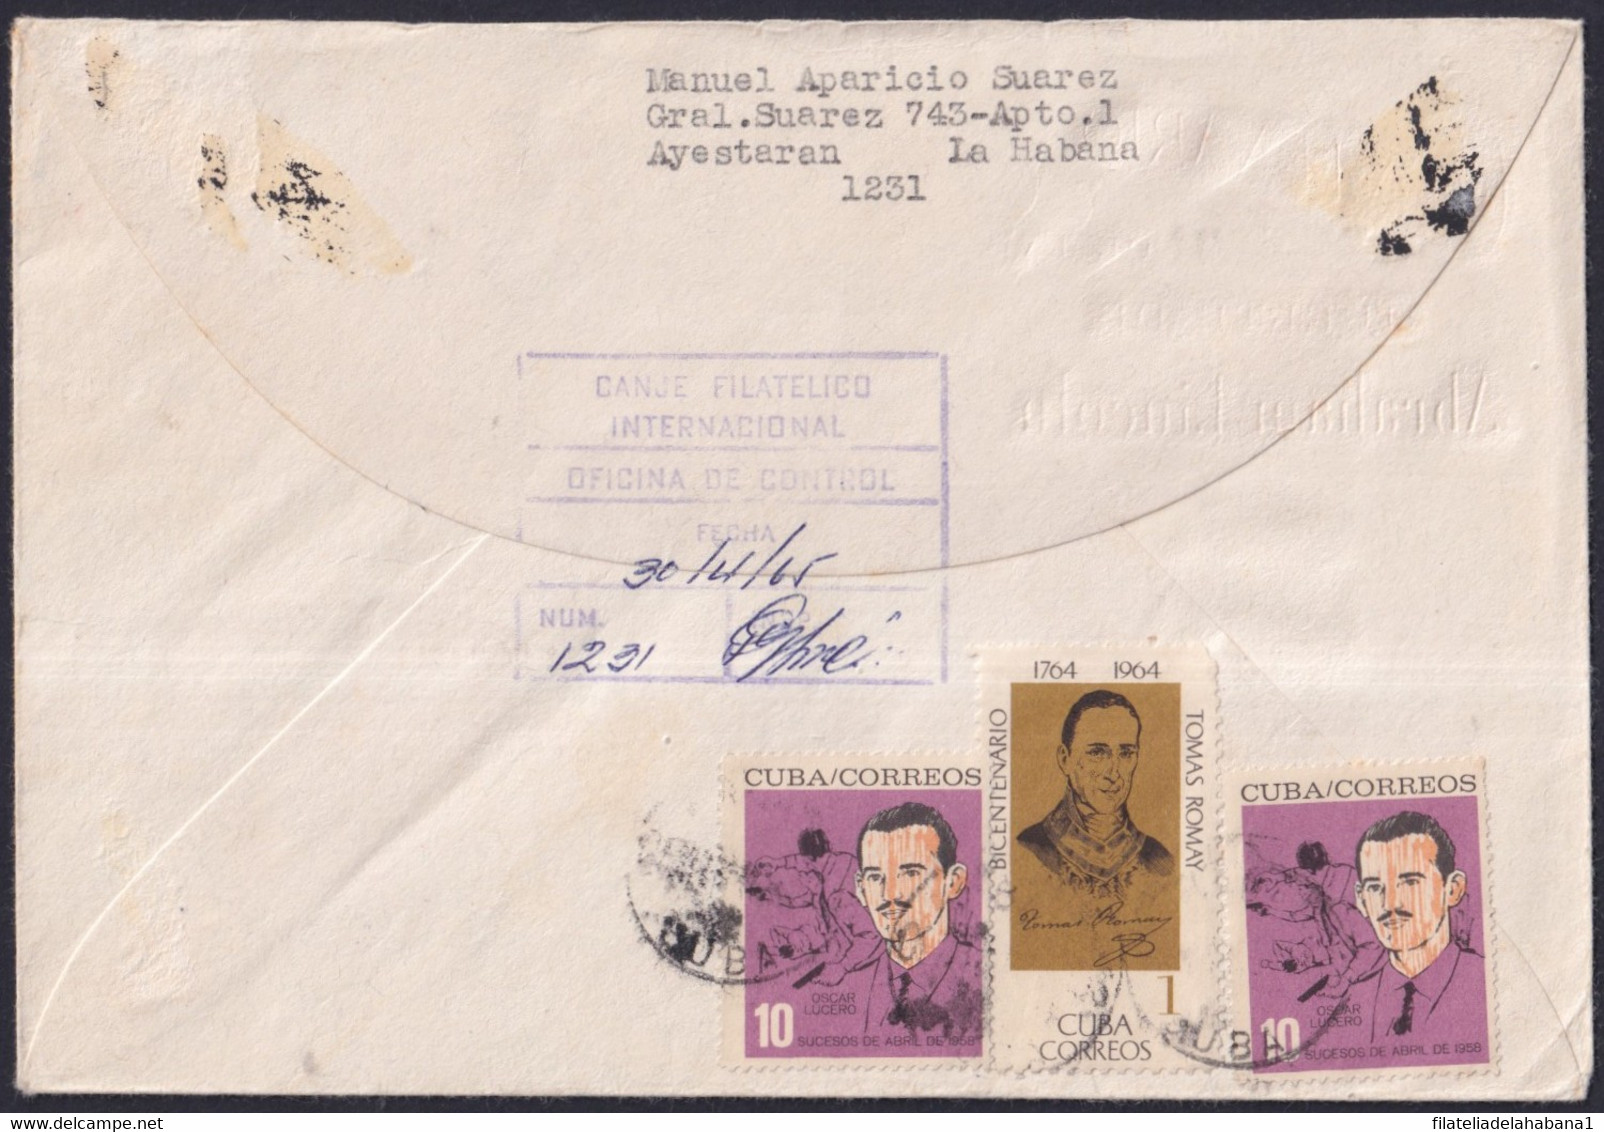 1965-FDC-96 CUBA 1965 FDC ABRAHAM LINCOLN REGISTERED COVER TO ESPAÑA SPAIN. - Storia Postale